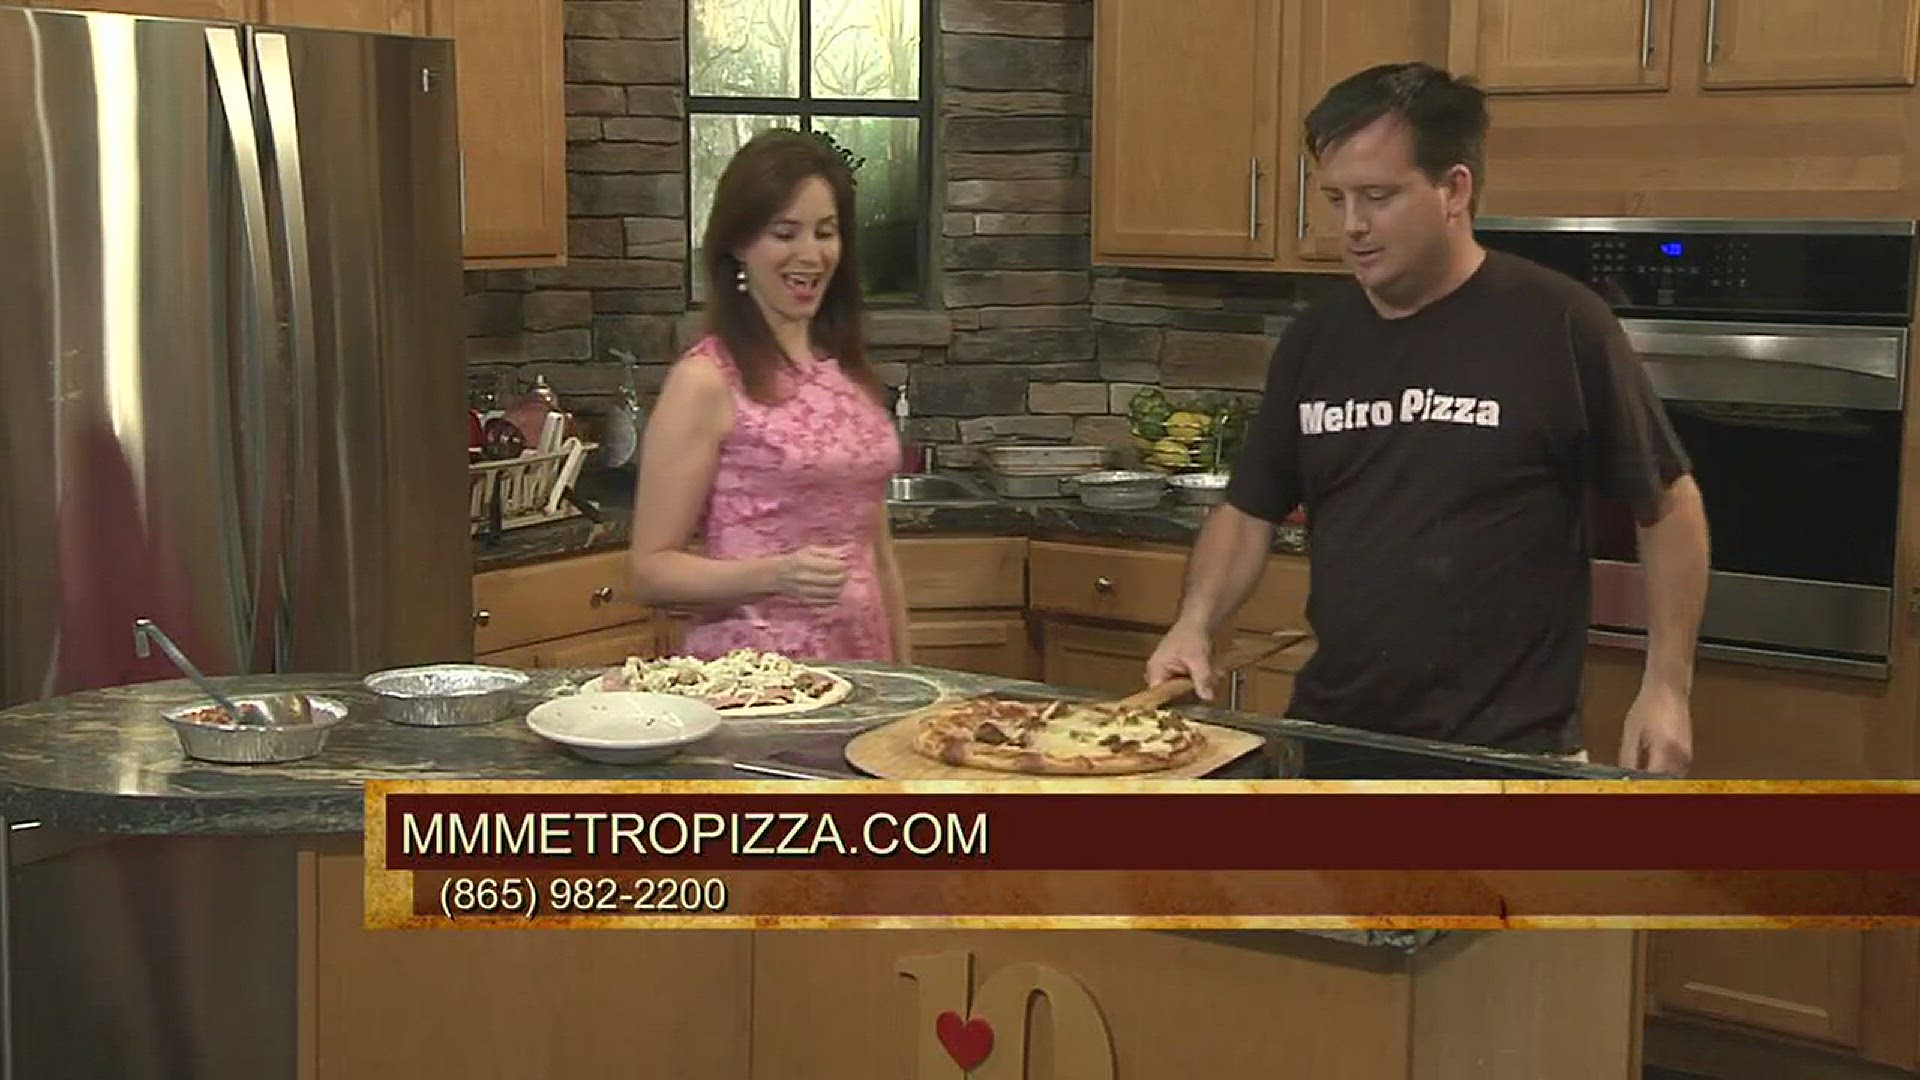 September 2, 2016Live at Five at 4A different pizza recipe from Metro Pizza in Alcoa.Metro Pizza is located at 1084 Hunters Crossing in Alcoa, Tennessee. Phone: (865) 982-2200, mmmetropizza.com.